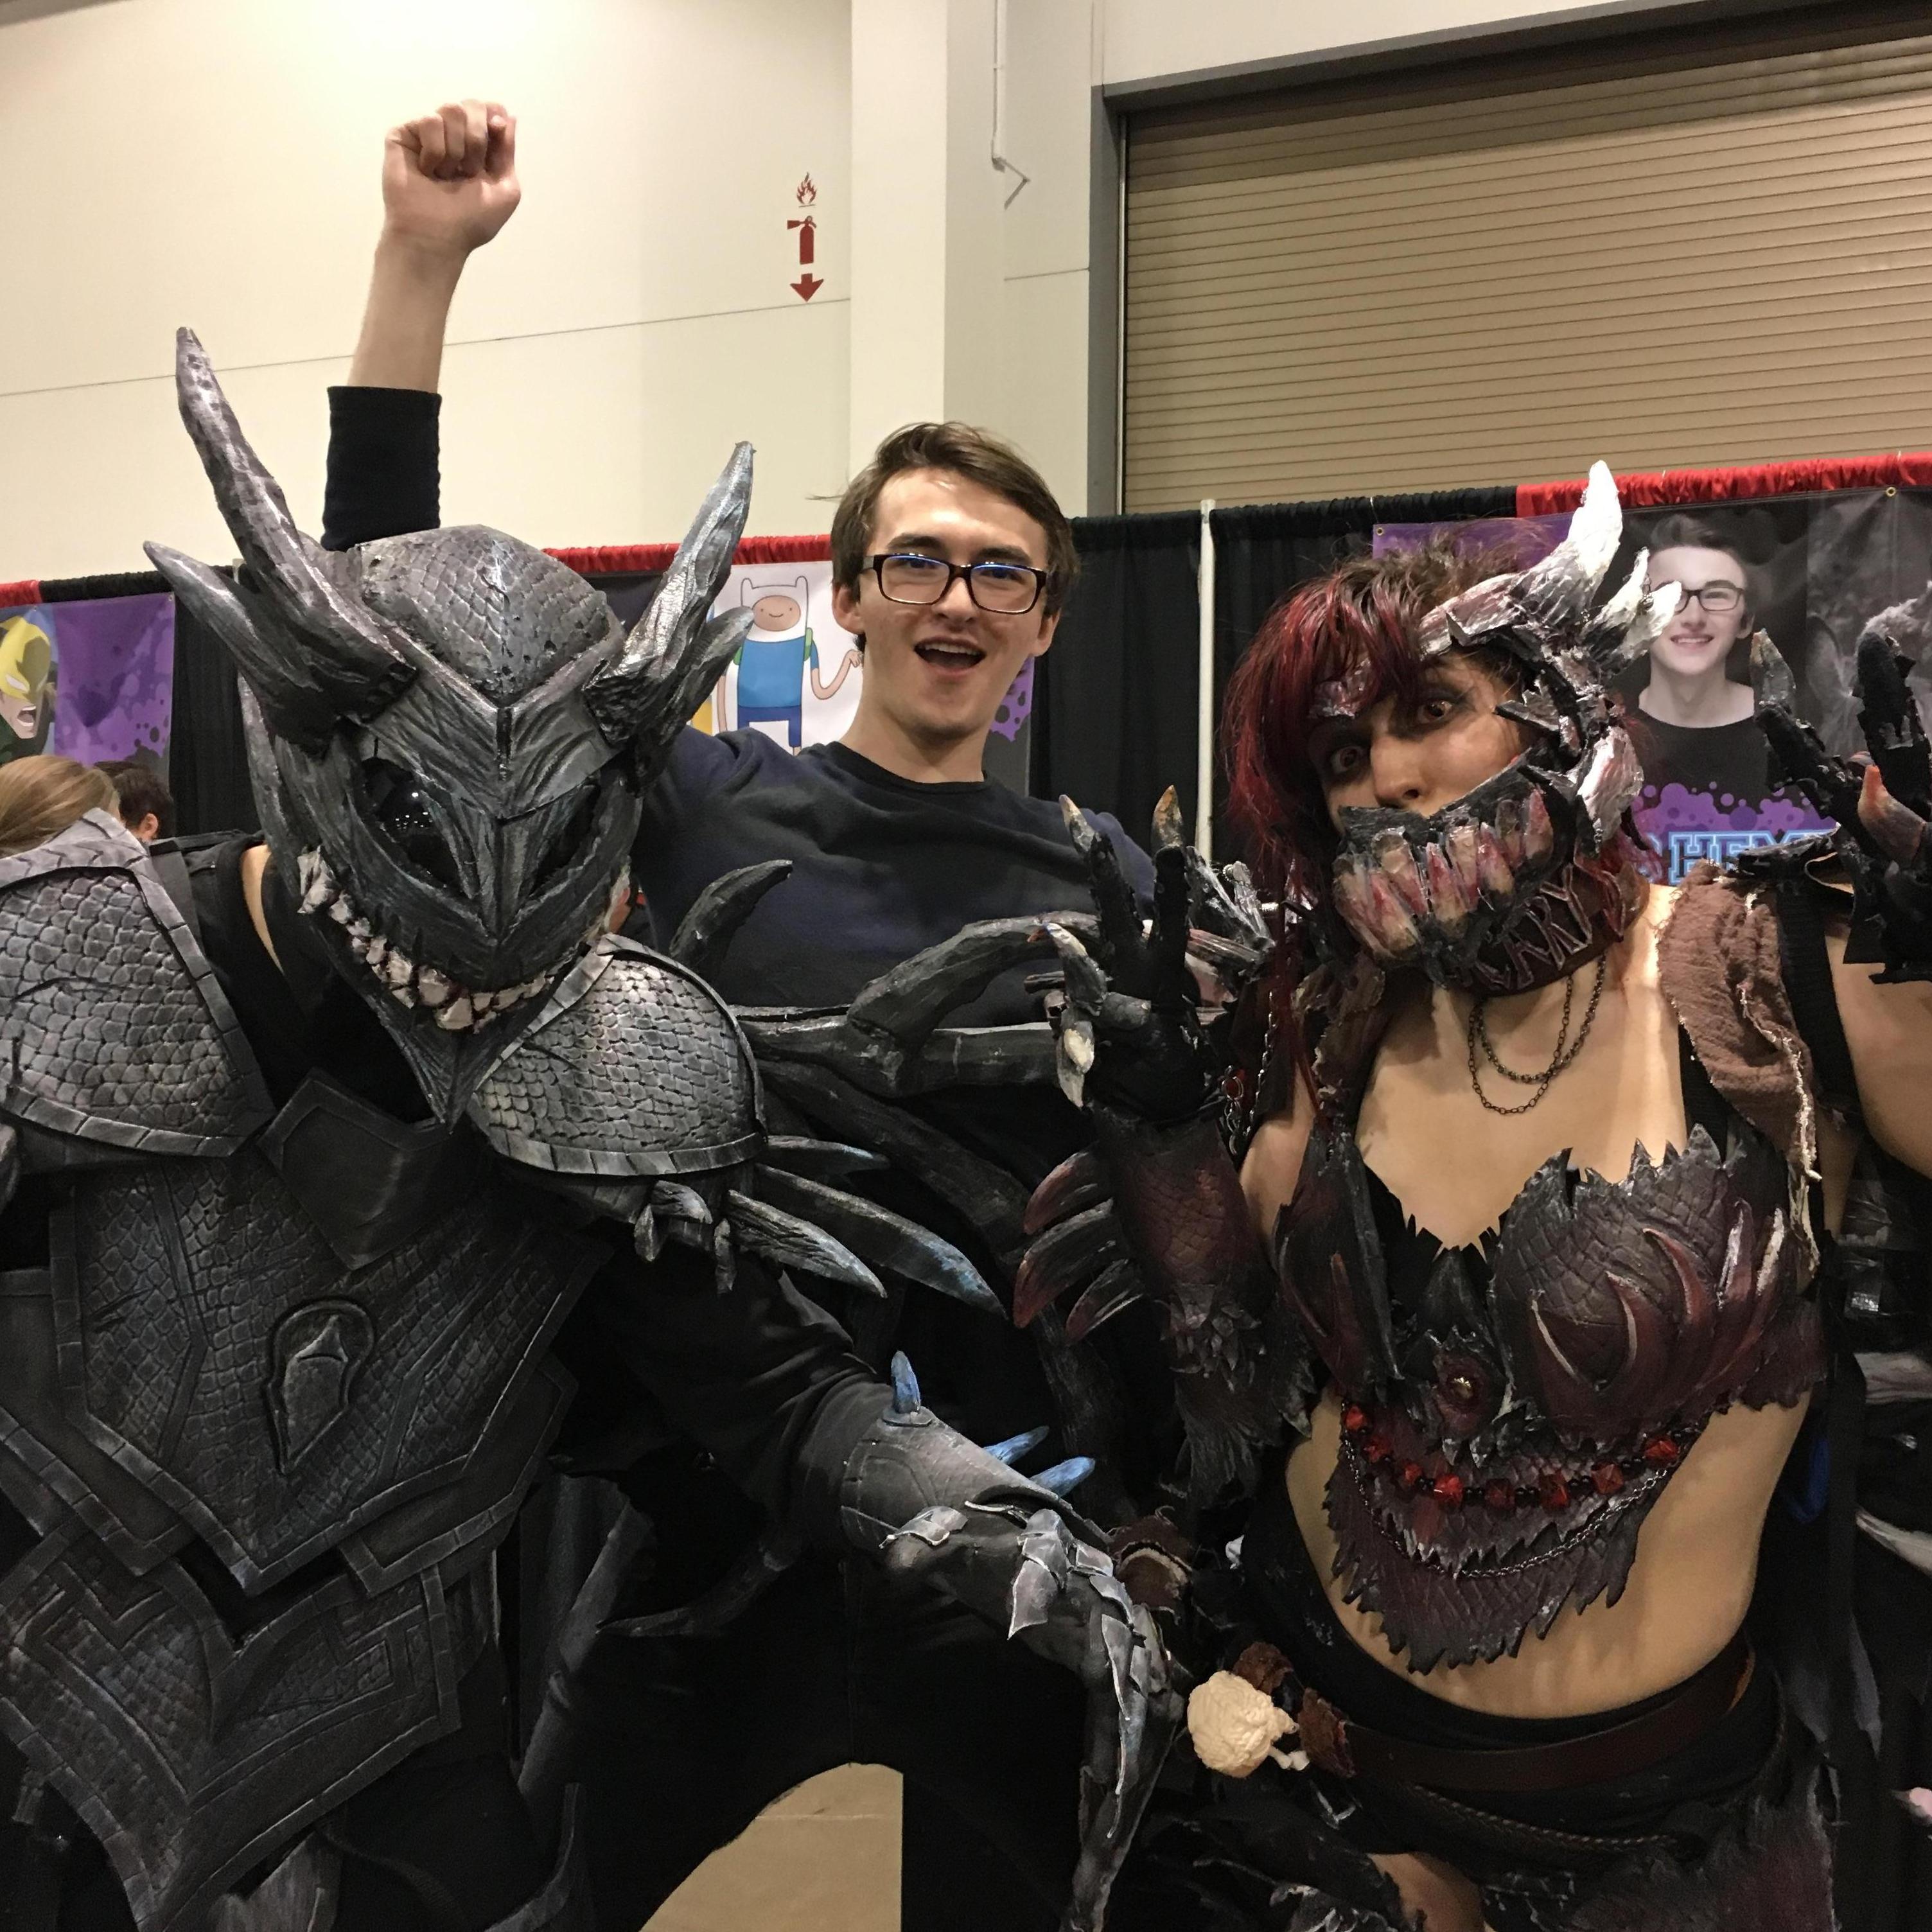 When we met the king himself from Game of Thrones in our dragon cosplay's. He took a photo to show the entire cast